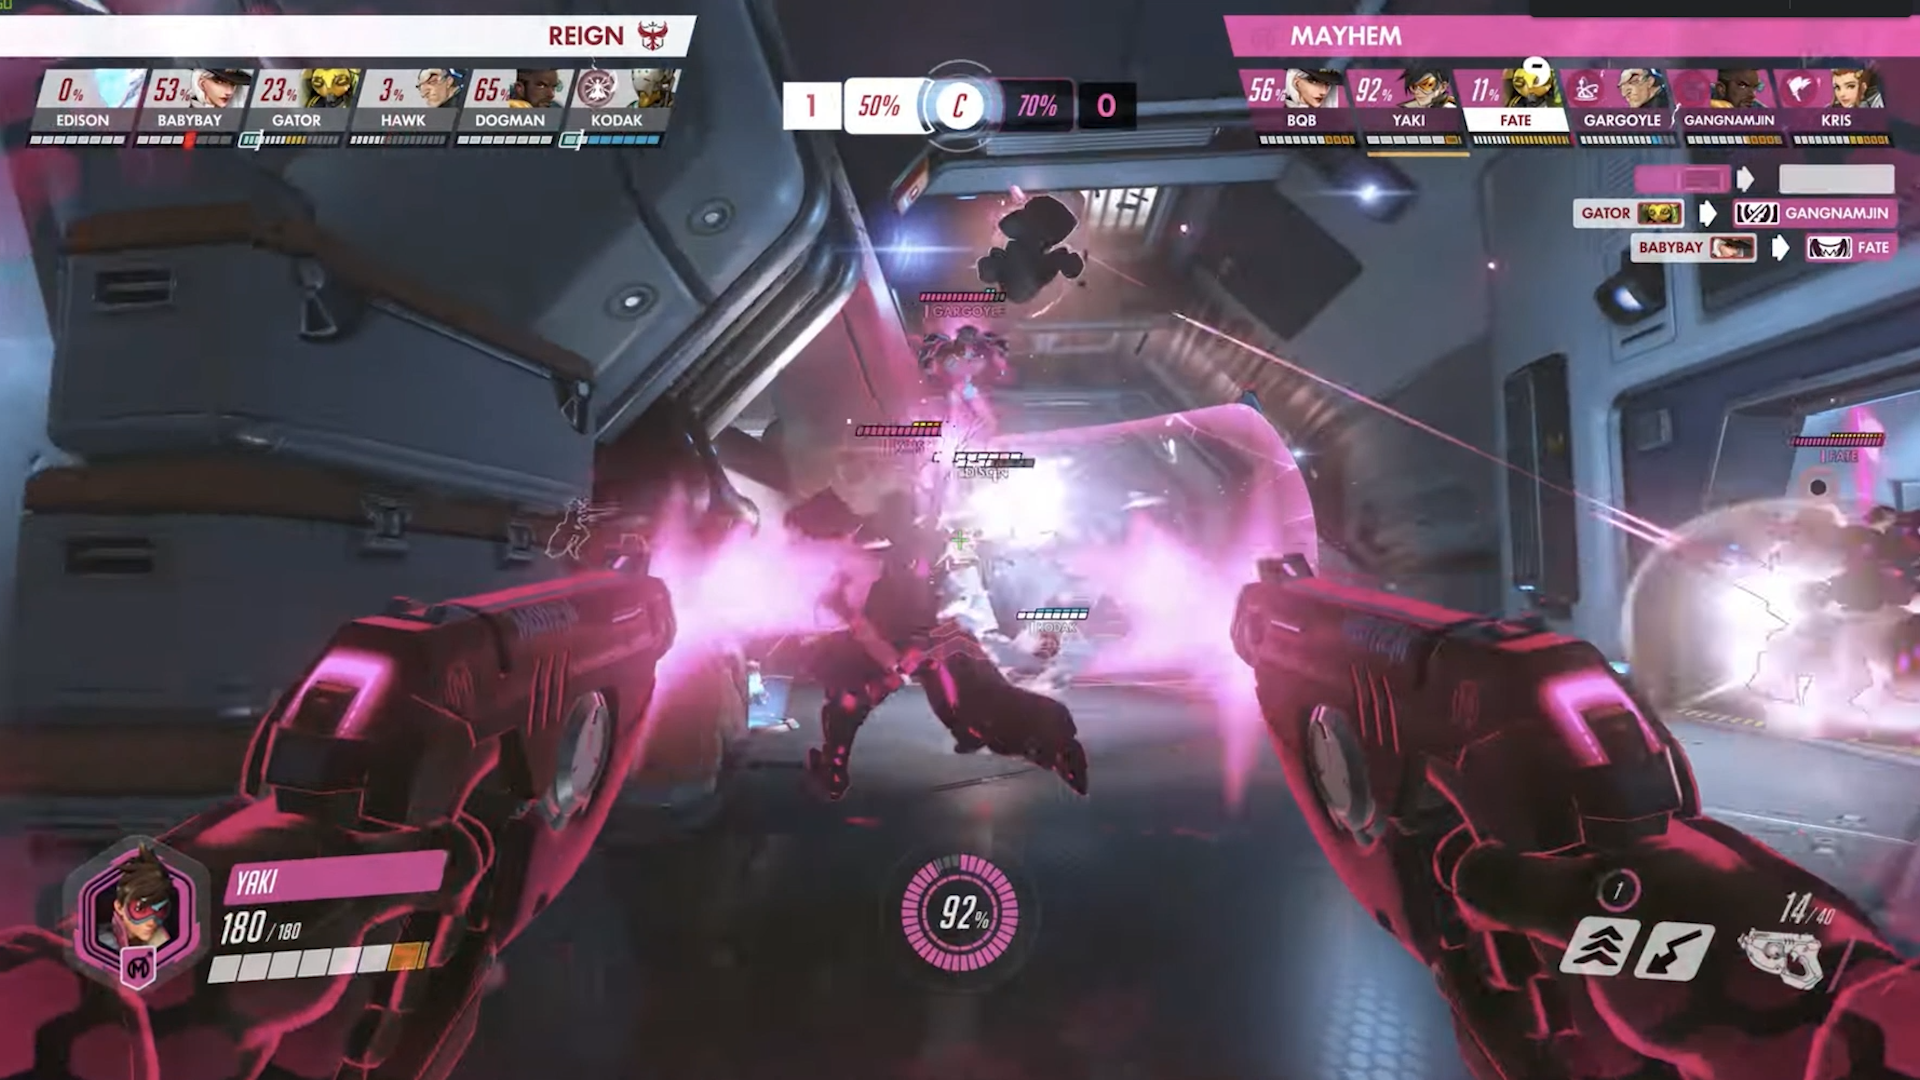 Overwatch League on X: Tracer DOMINATED this #OWL2023 Top Plays